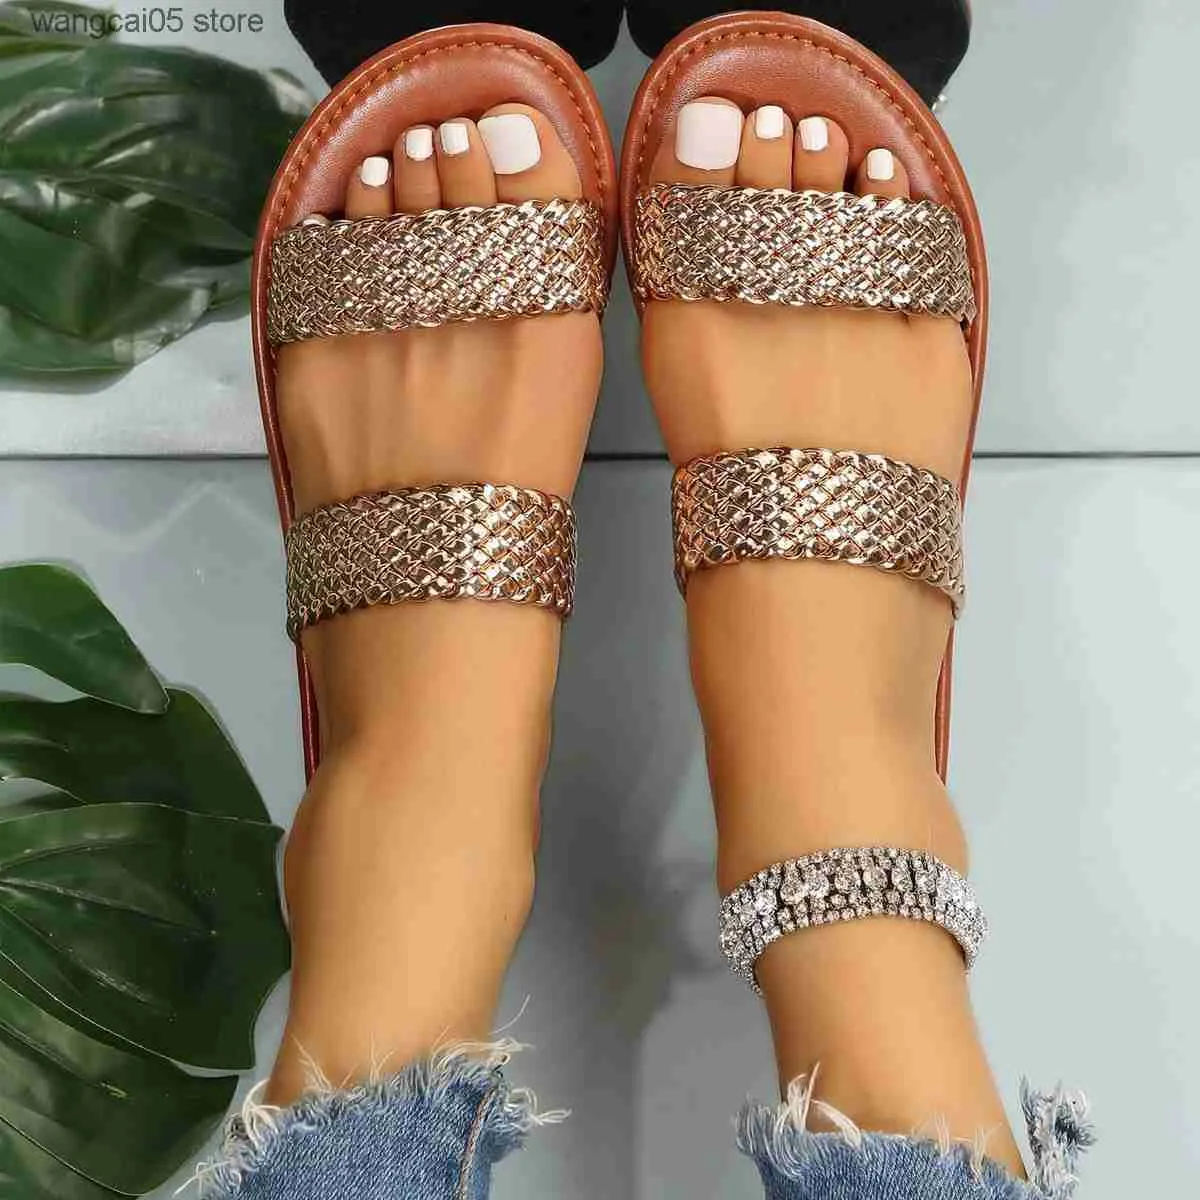 Slippers Womens flat bottom slippers fashionable metal woven Sandals summer vacation slippers T240220